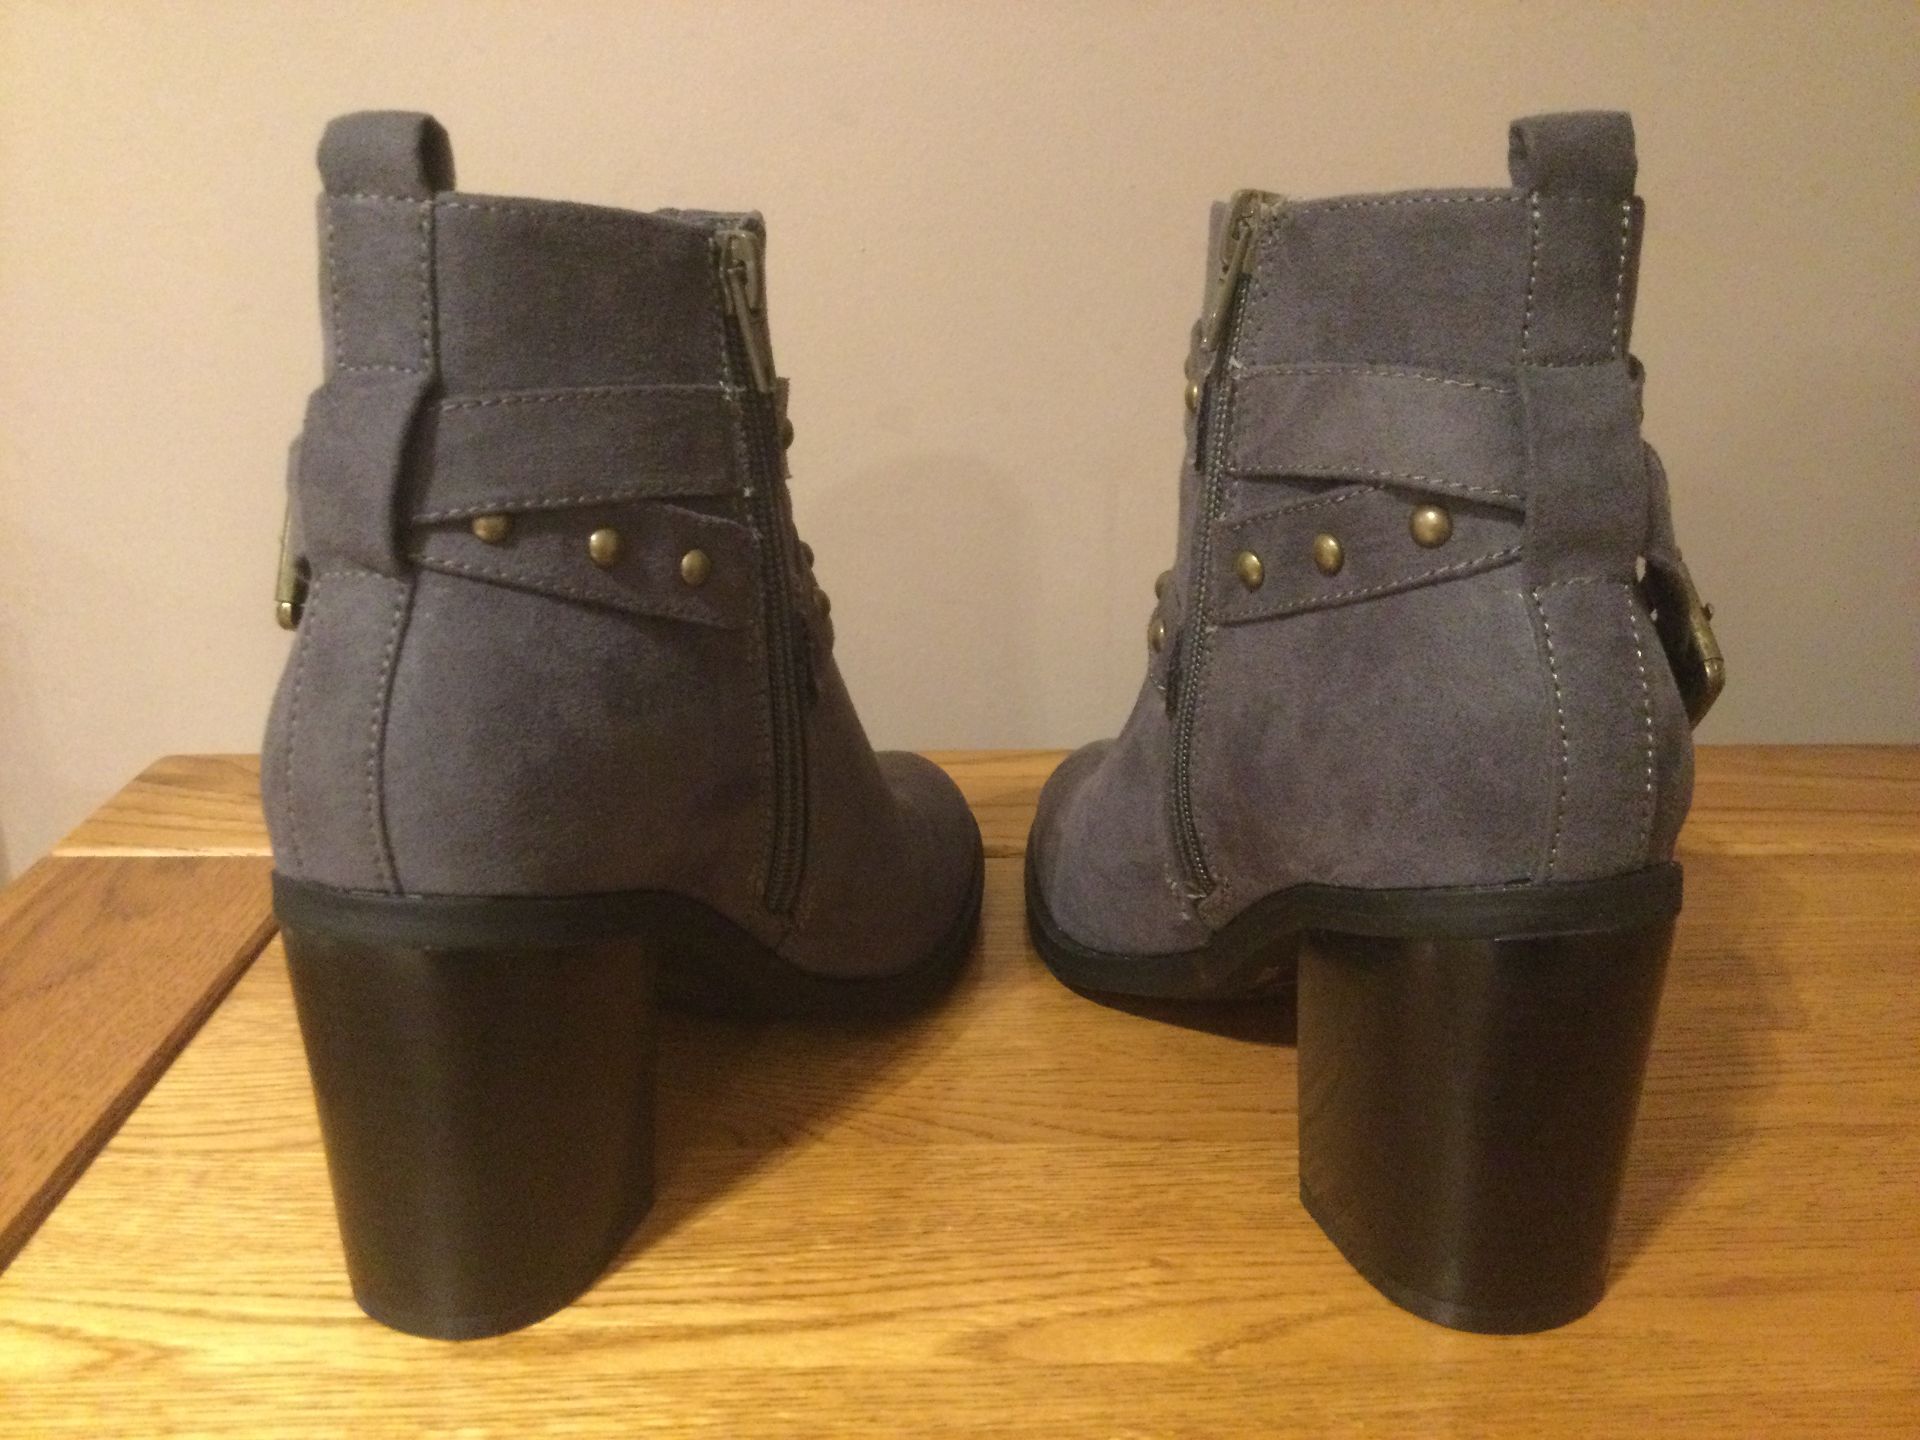 Dolcis “Piper” High Block Heel Ankle Boots, Size 7, Grey - New RRP £49.99 - Image 2 of 6